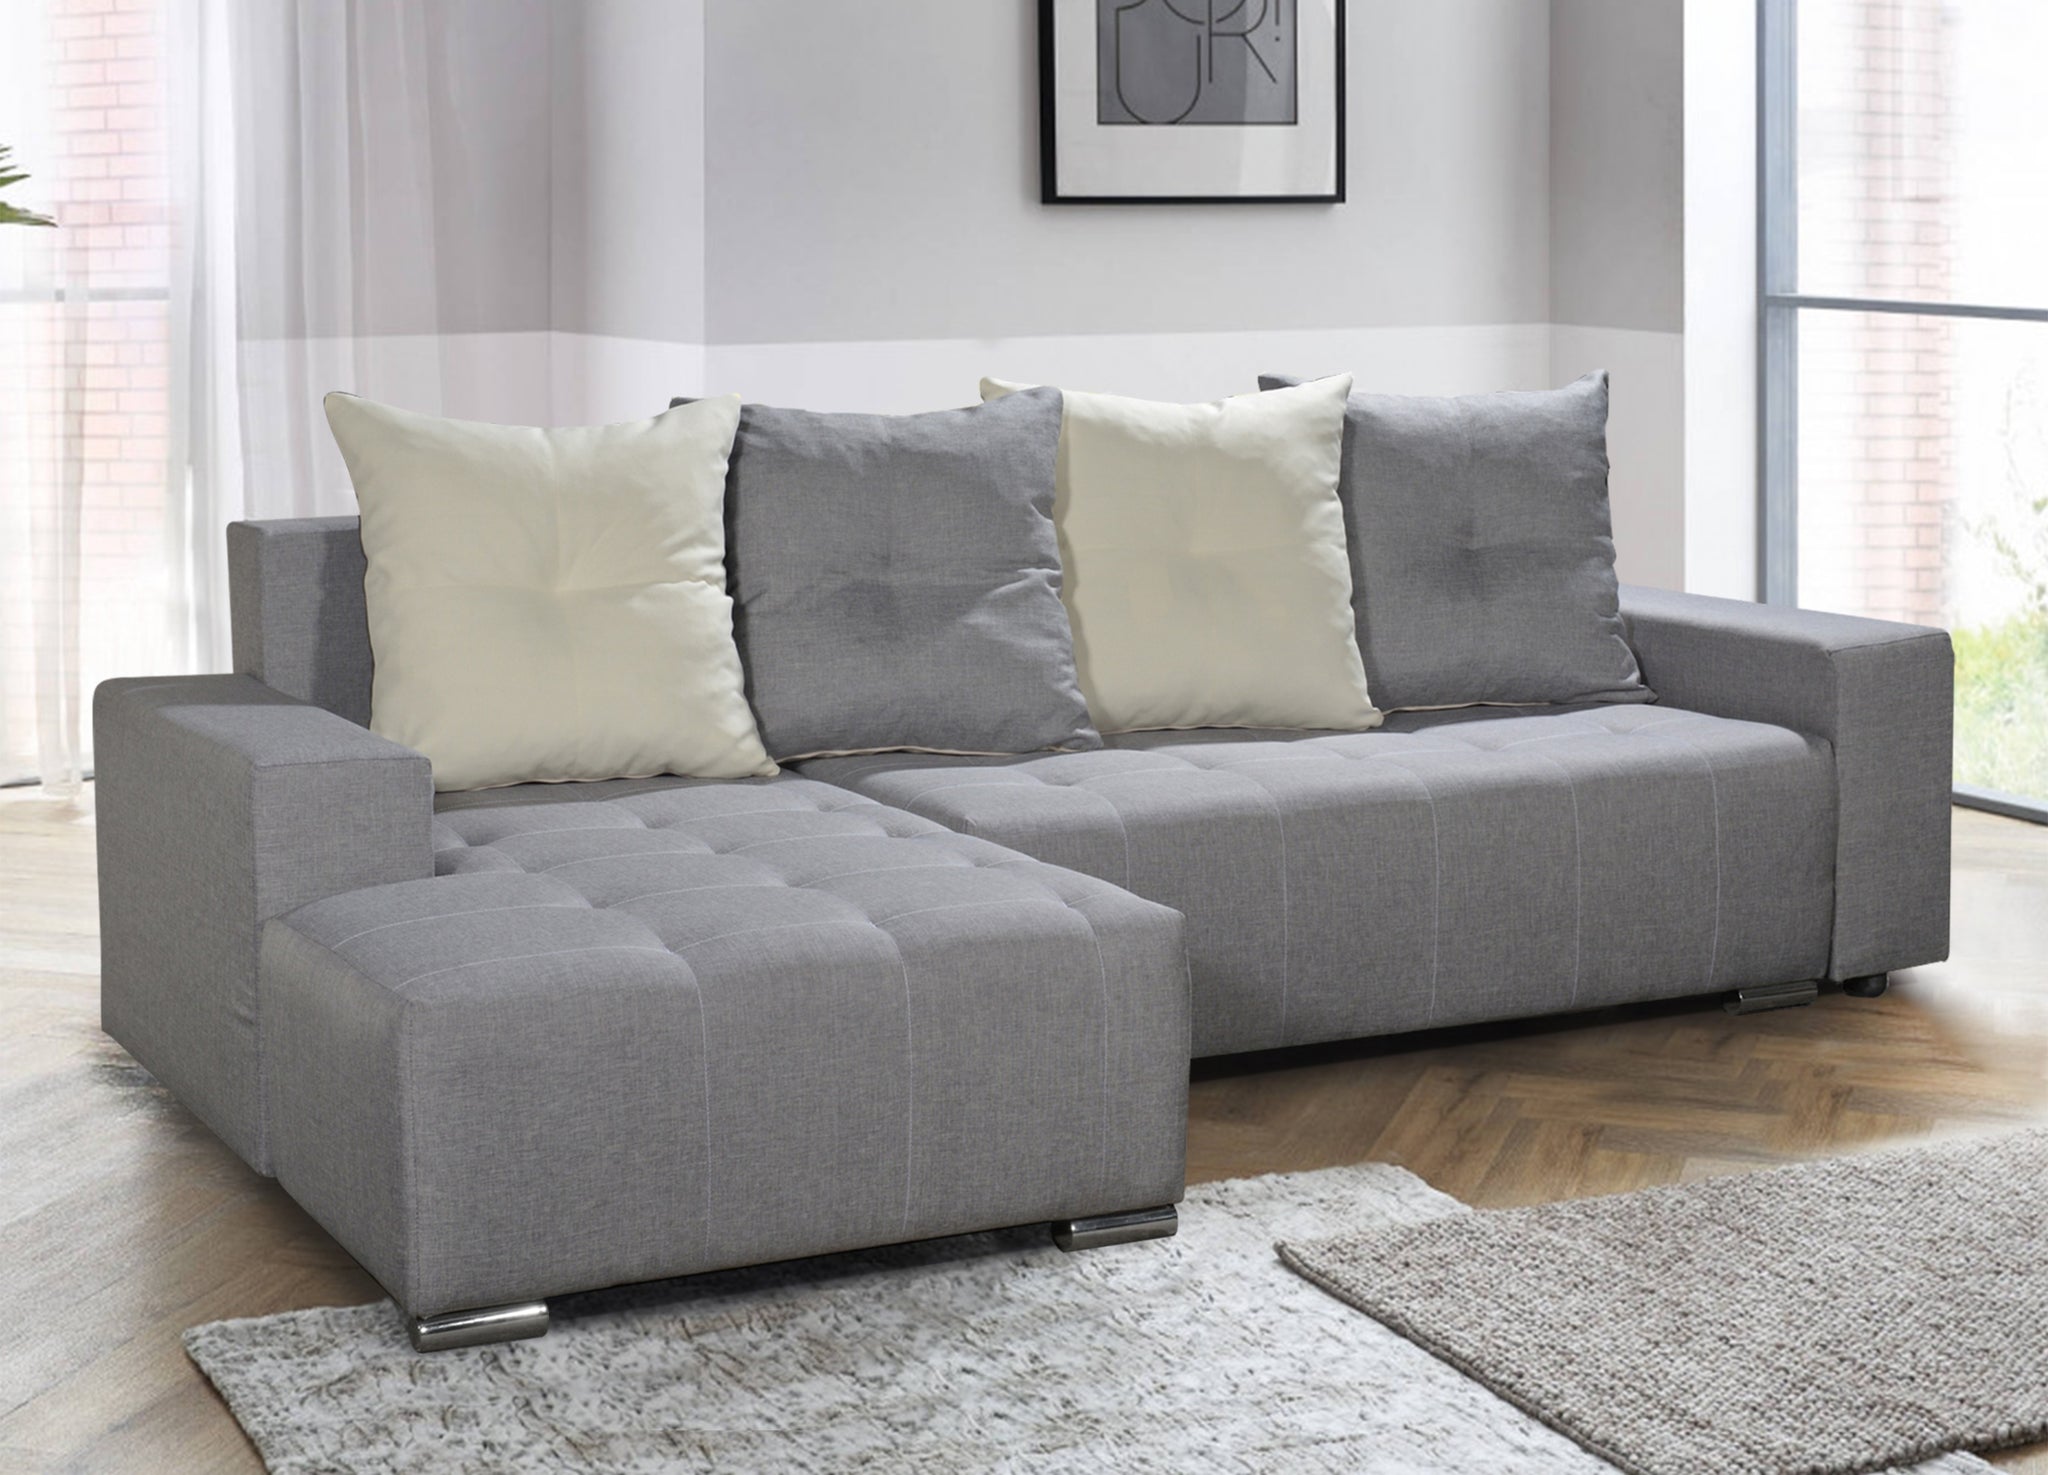 How To Choose A Perfect L-Shape Sofa for your living room | DHS – Dream ...